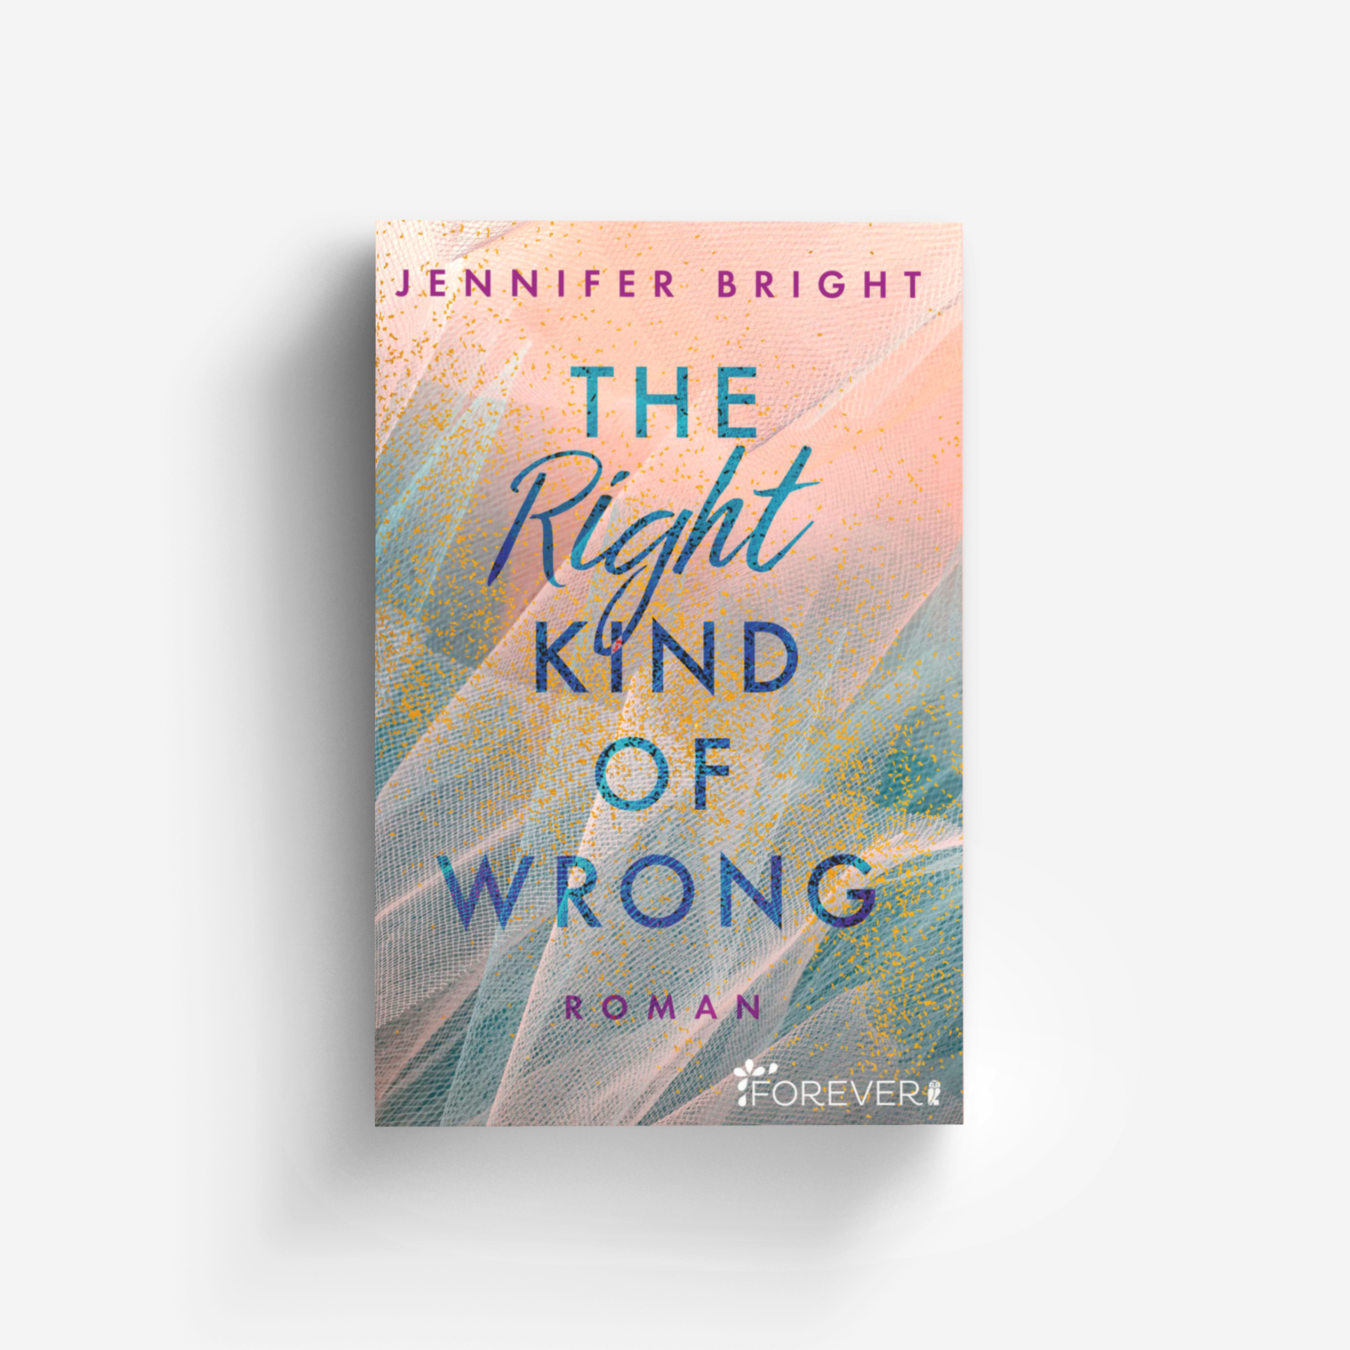 Buchcover von The Right Kind of Wrong